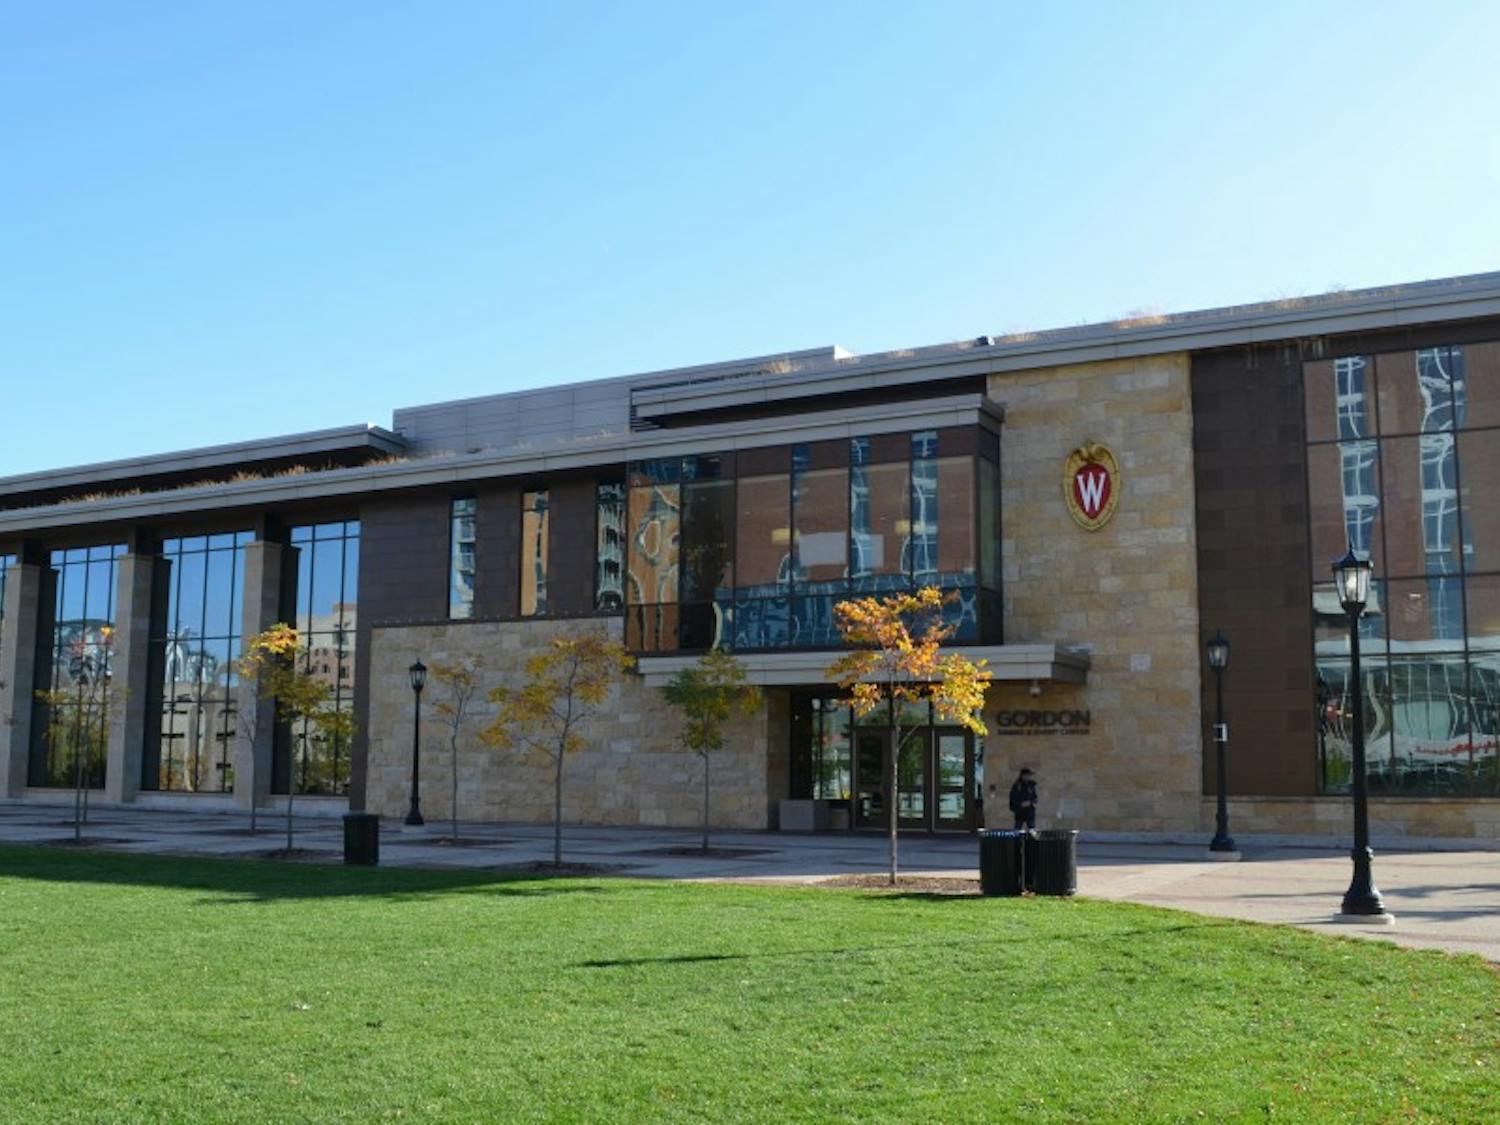 UW-Madison community members have created a petition against the new dining hall policy that would require students to spend a minimum of $1,400 on dining.